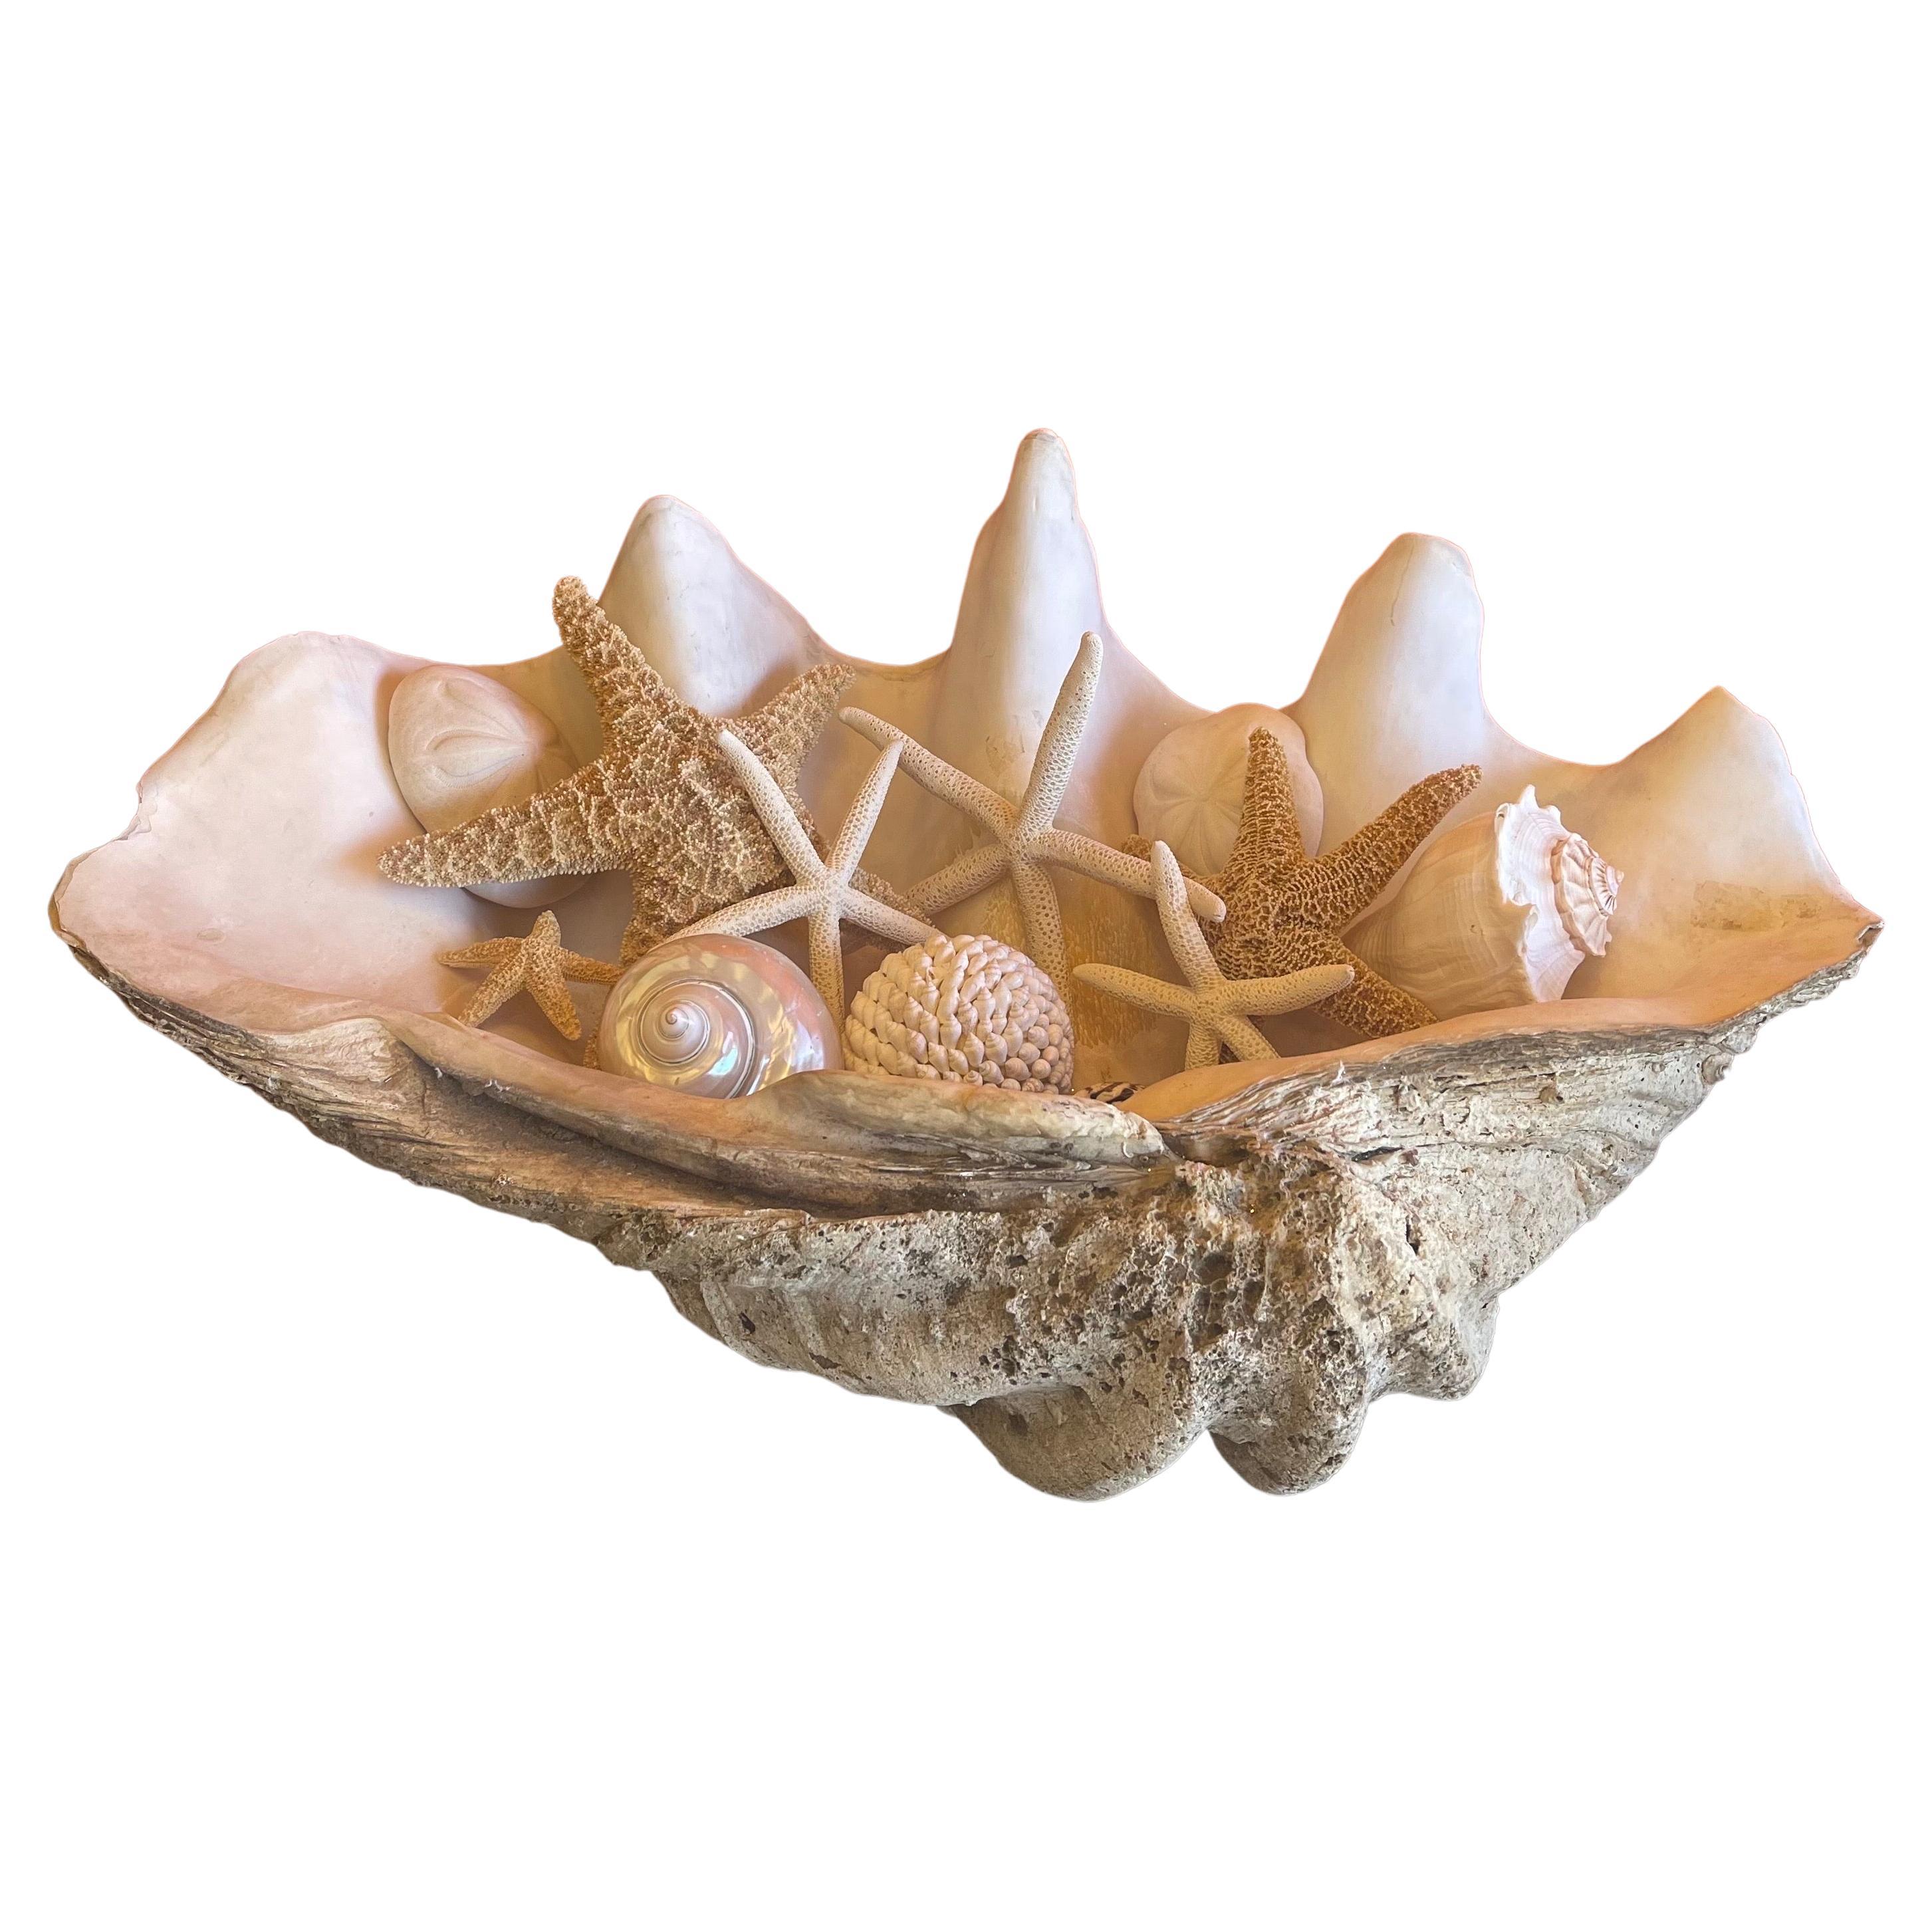 Massive Sculptural Giant South Pacific Clam Shell with Shells and Starfish